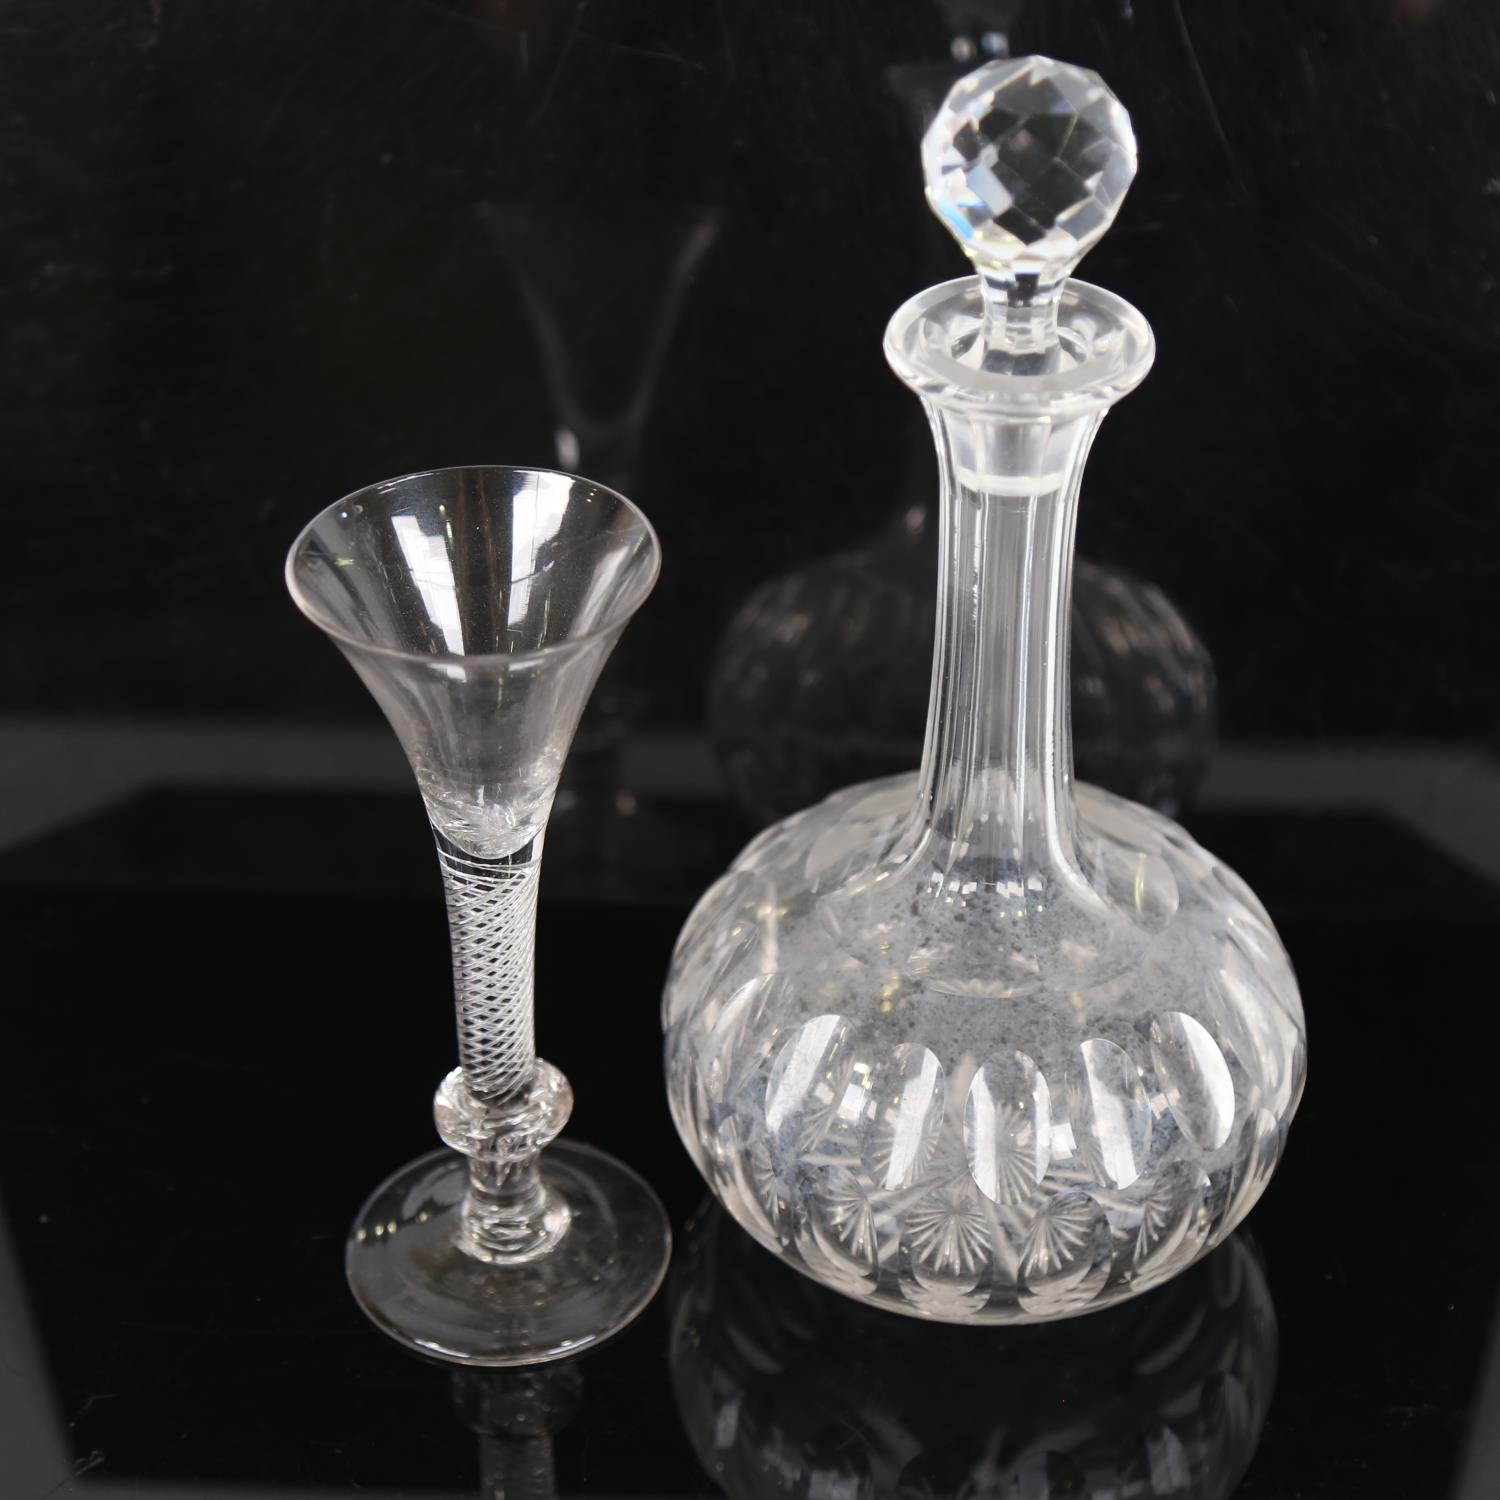 An 18th century cordial glass, with funnel-shaped bowl and air twist stem, height 18cm, and a cut-